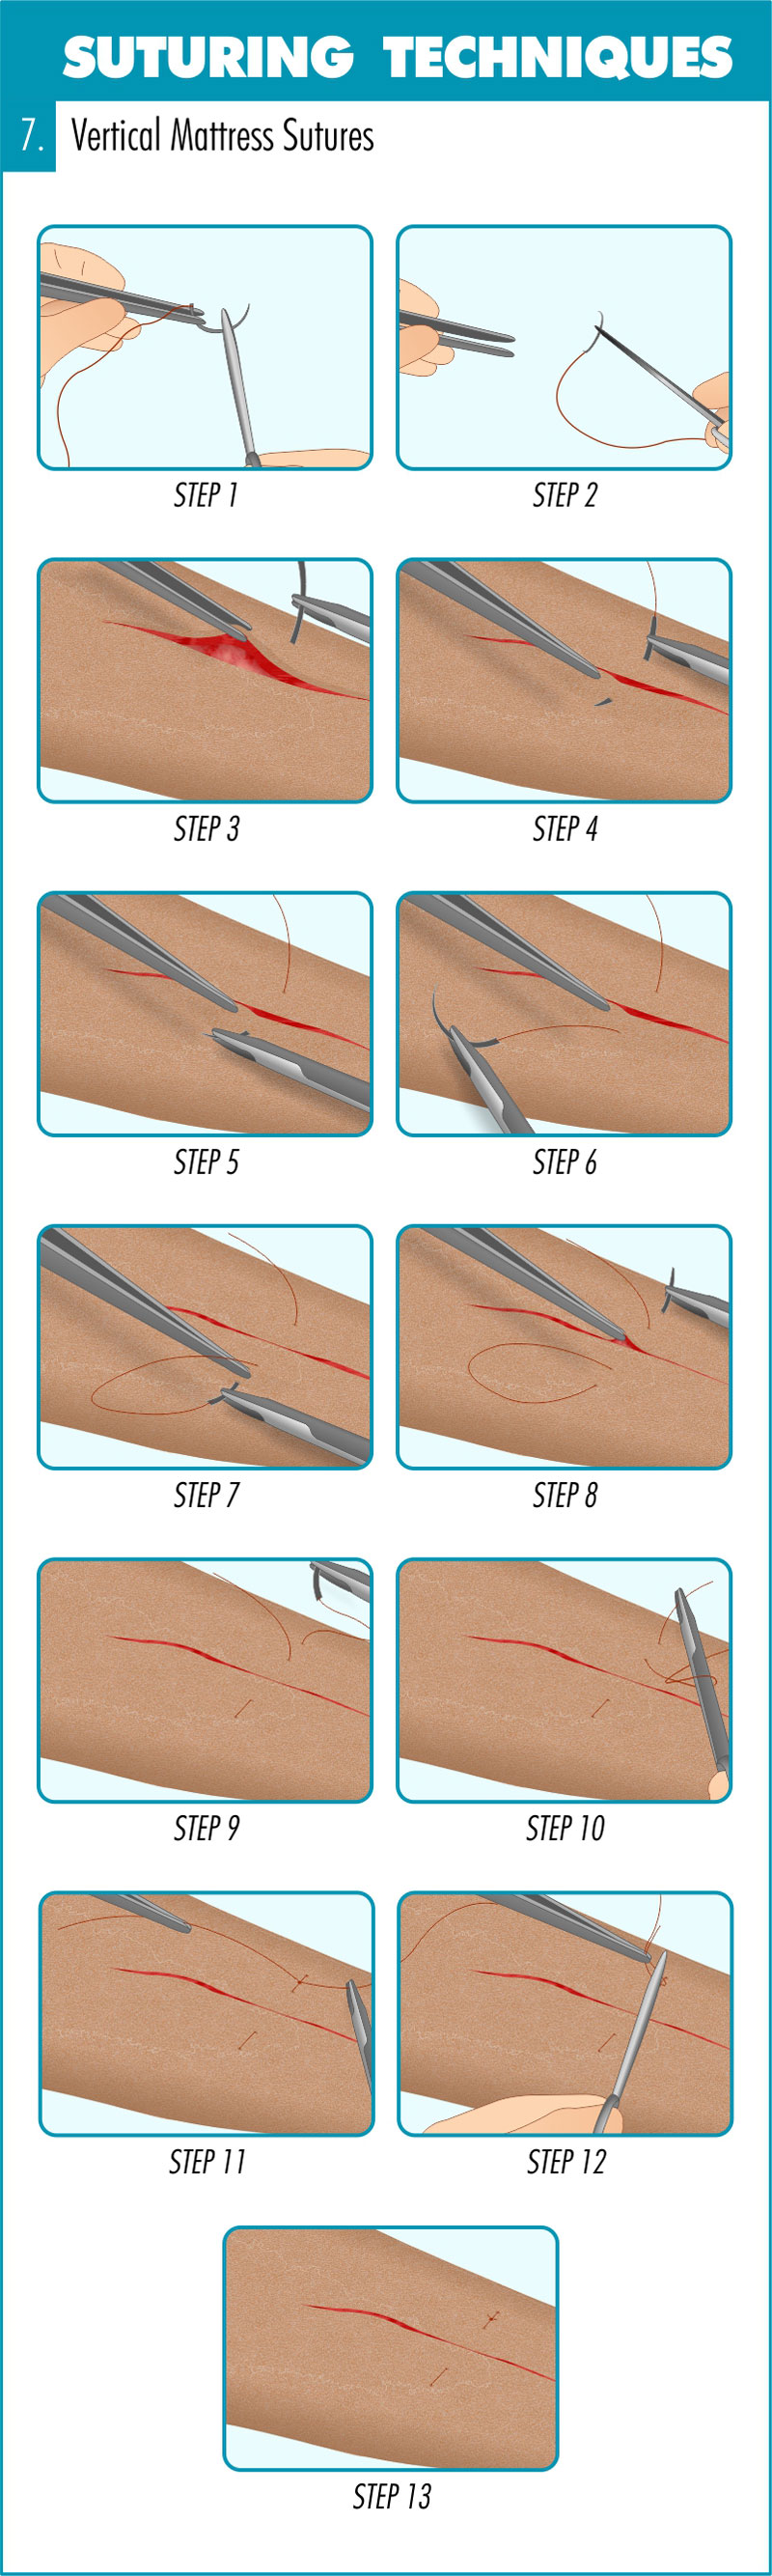 Purse-String Suture for Skin Closure Following Large Thyroidectomy